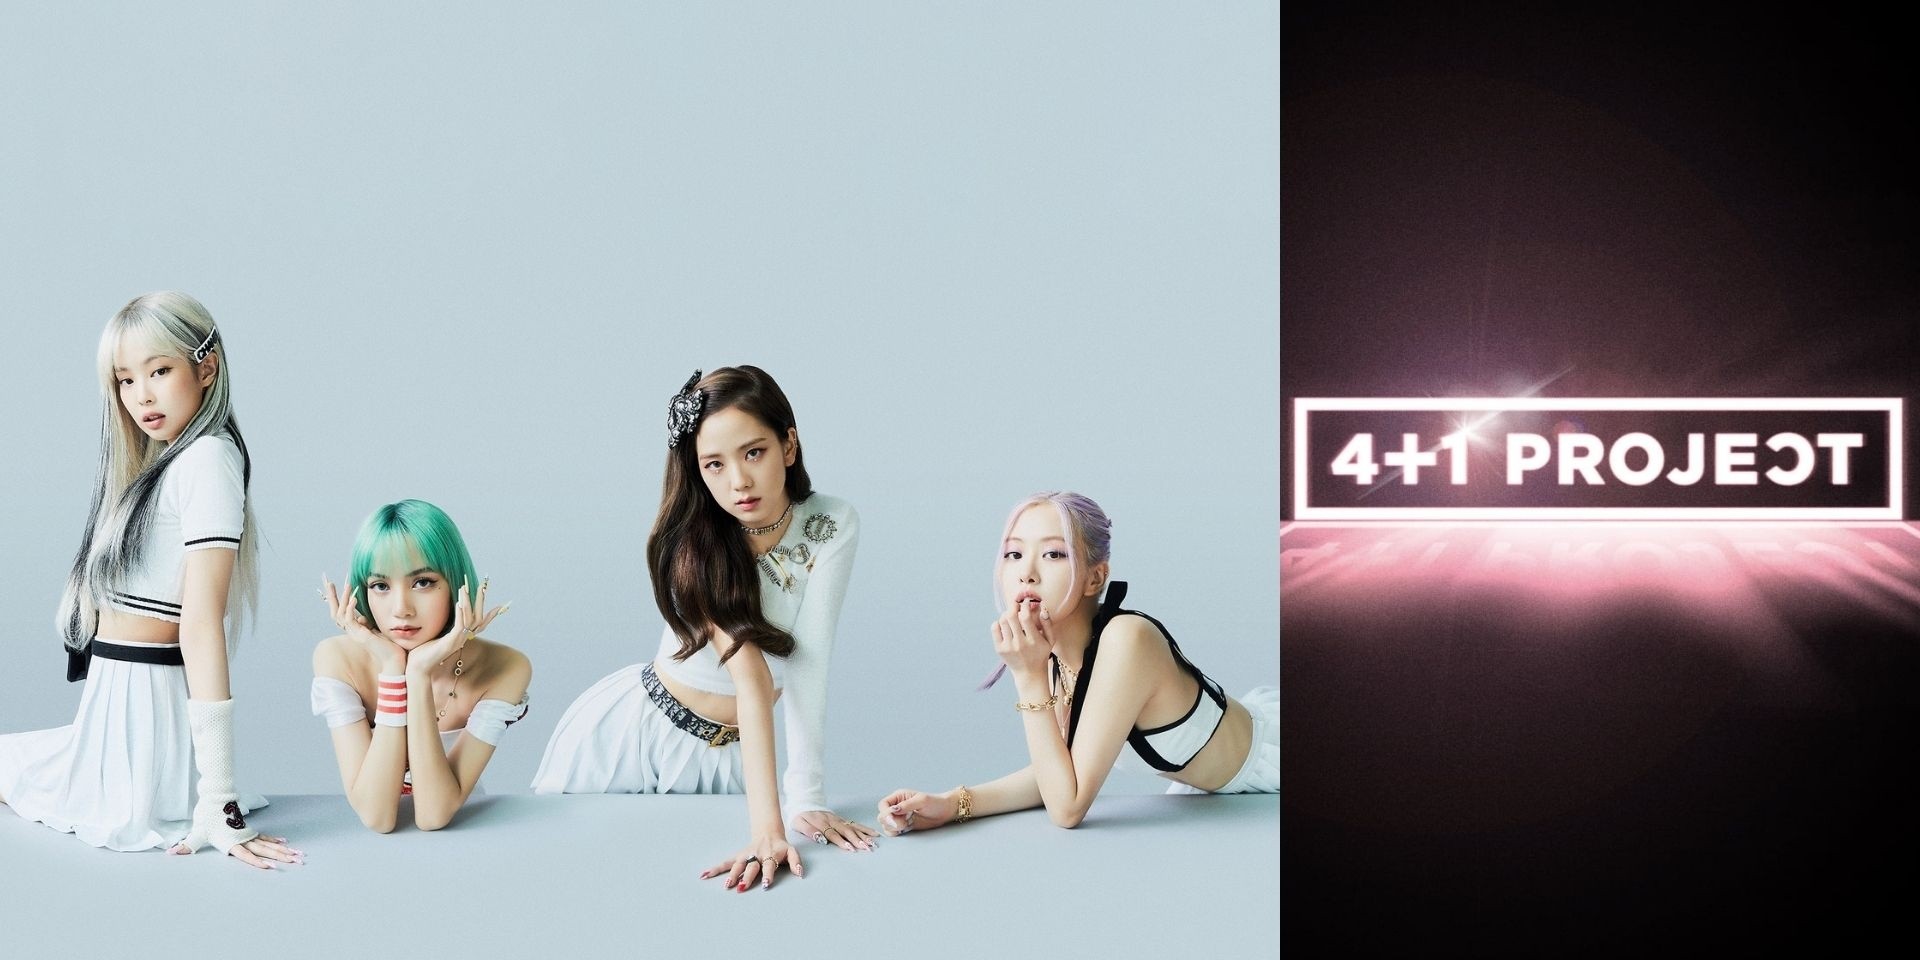 BLACKPINK announce '4+1 PROJECT' for 5th anniversary, including new movie and photobook — here's all you need to know